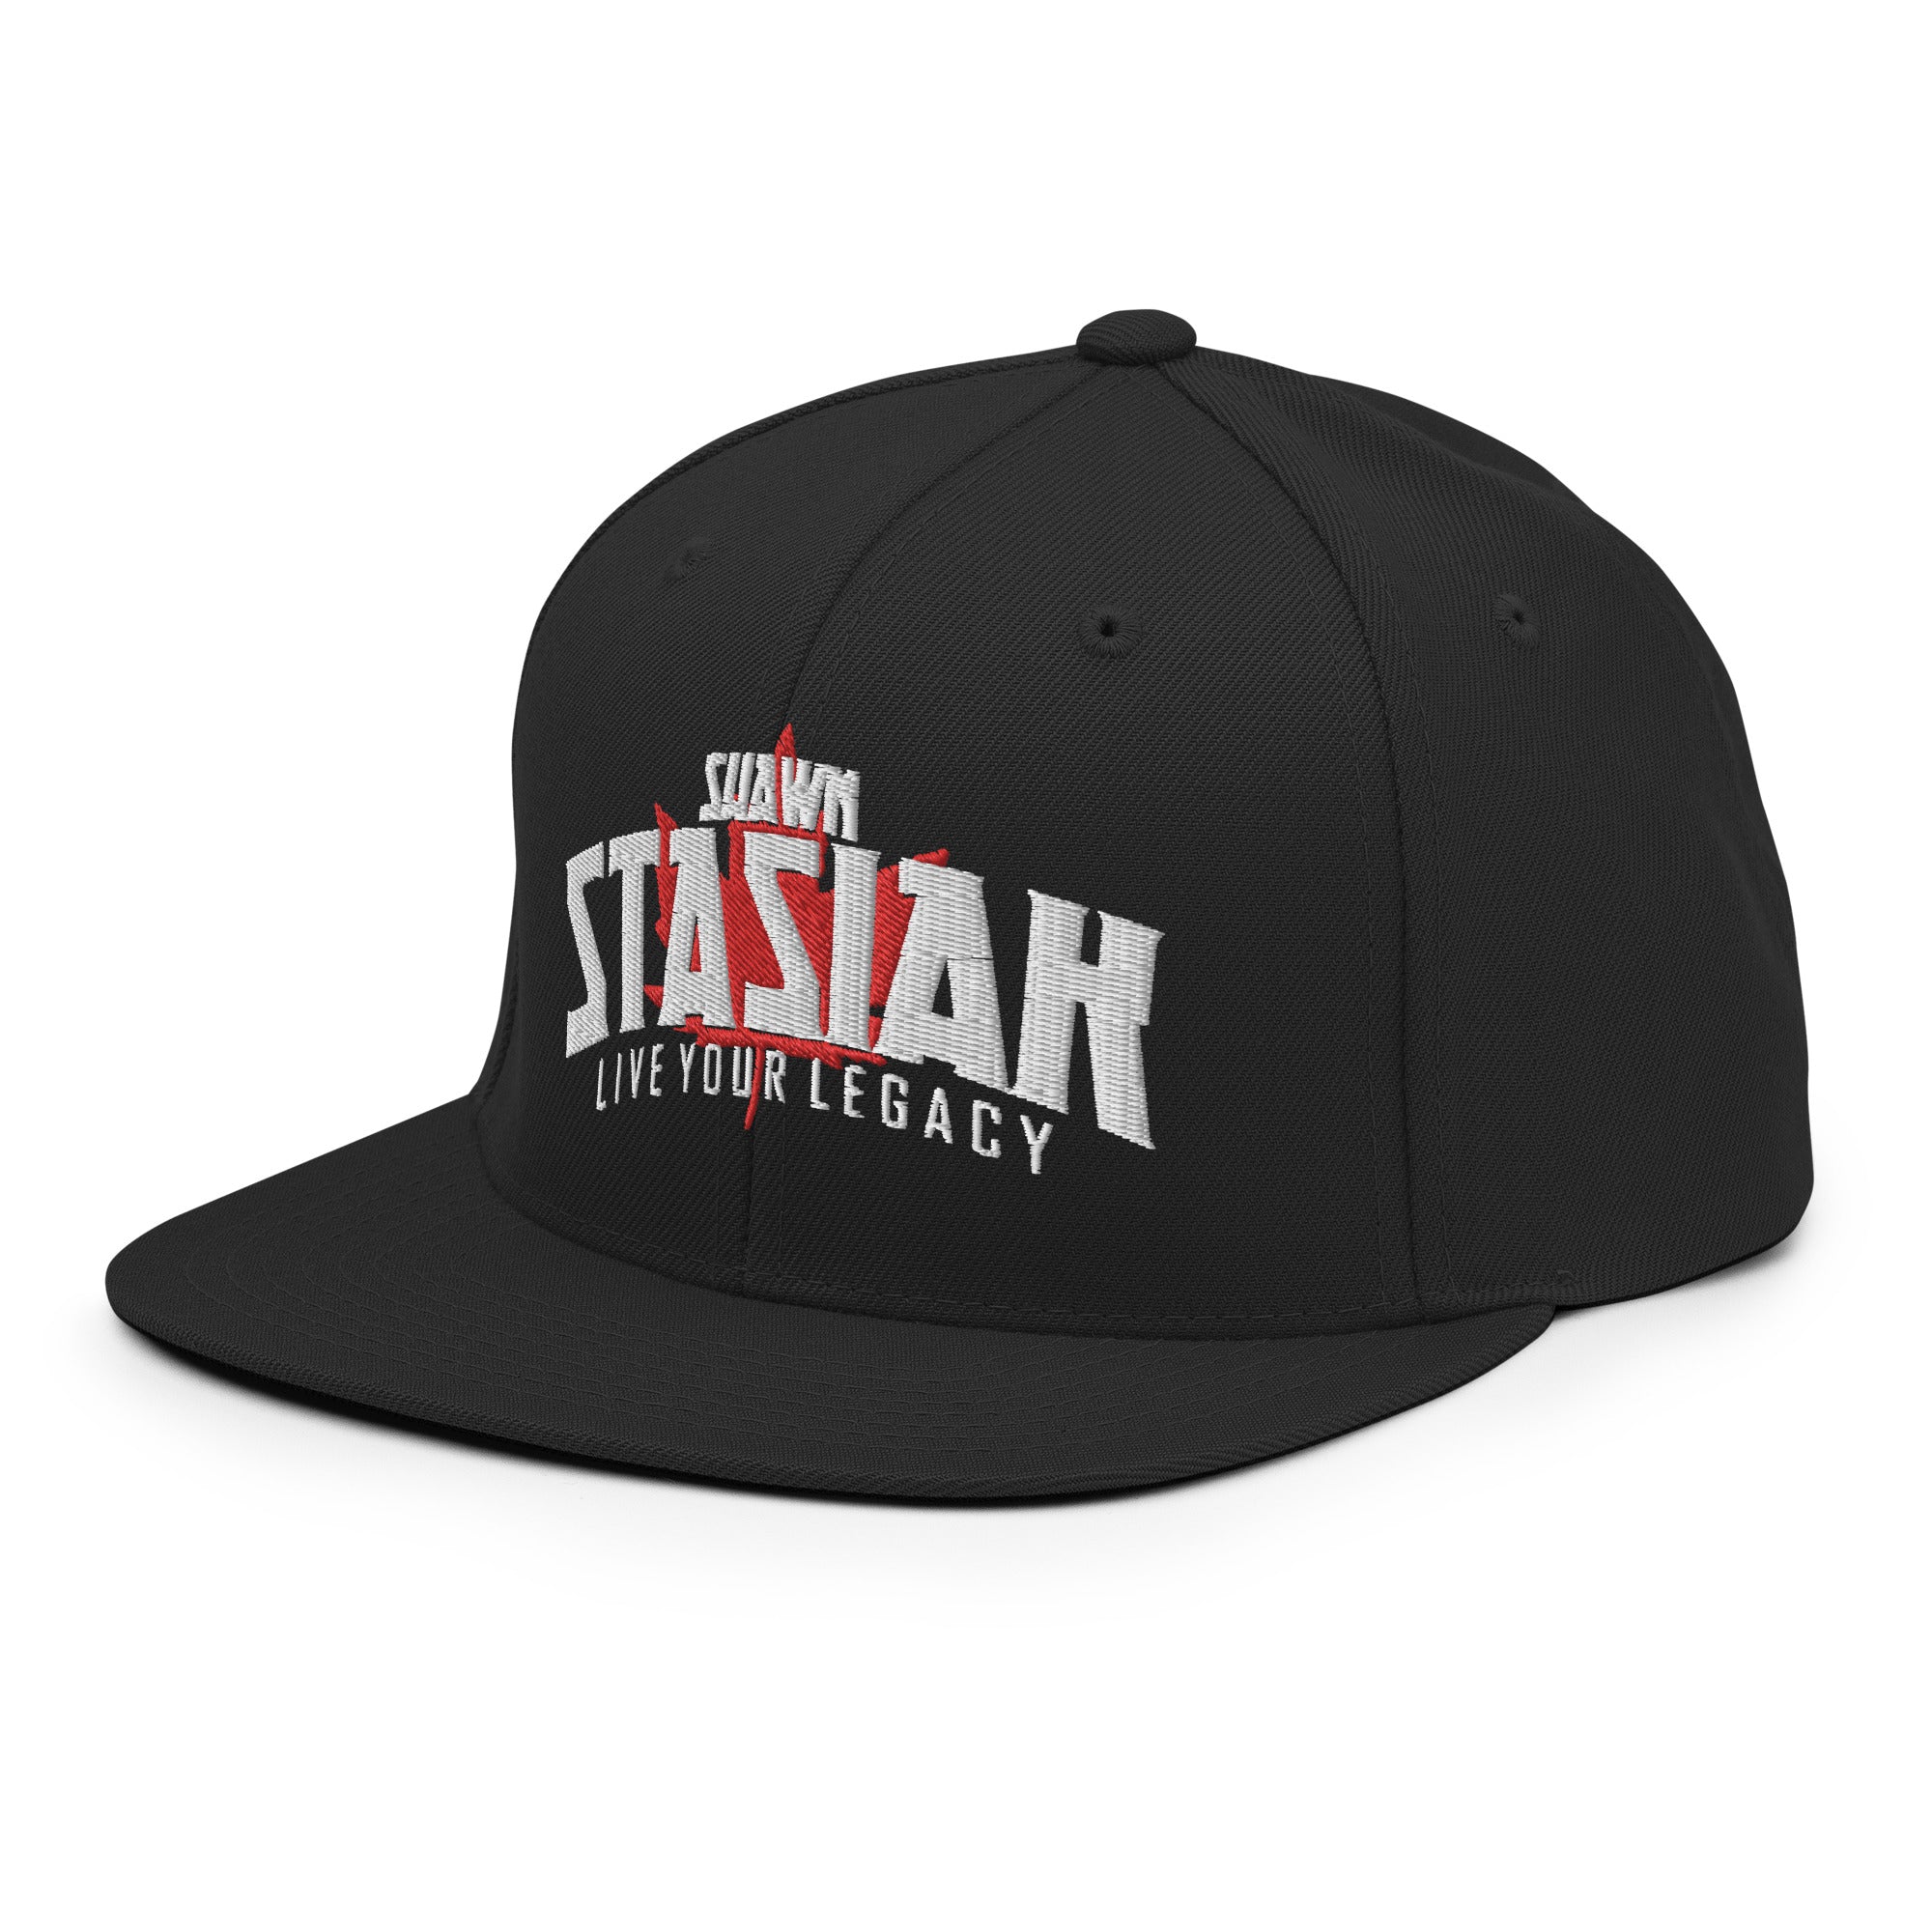 Shawn Stasiak "Live Your Legacy" Canadian Snapback Hat